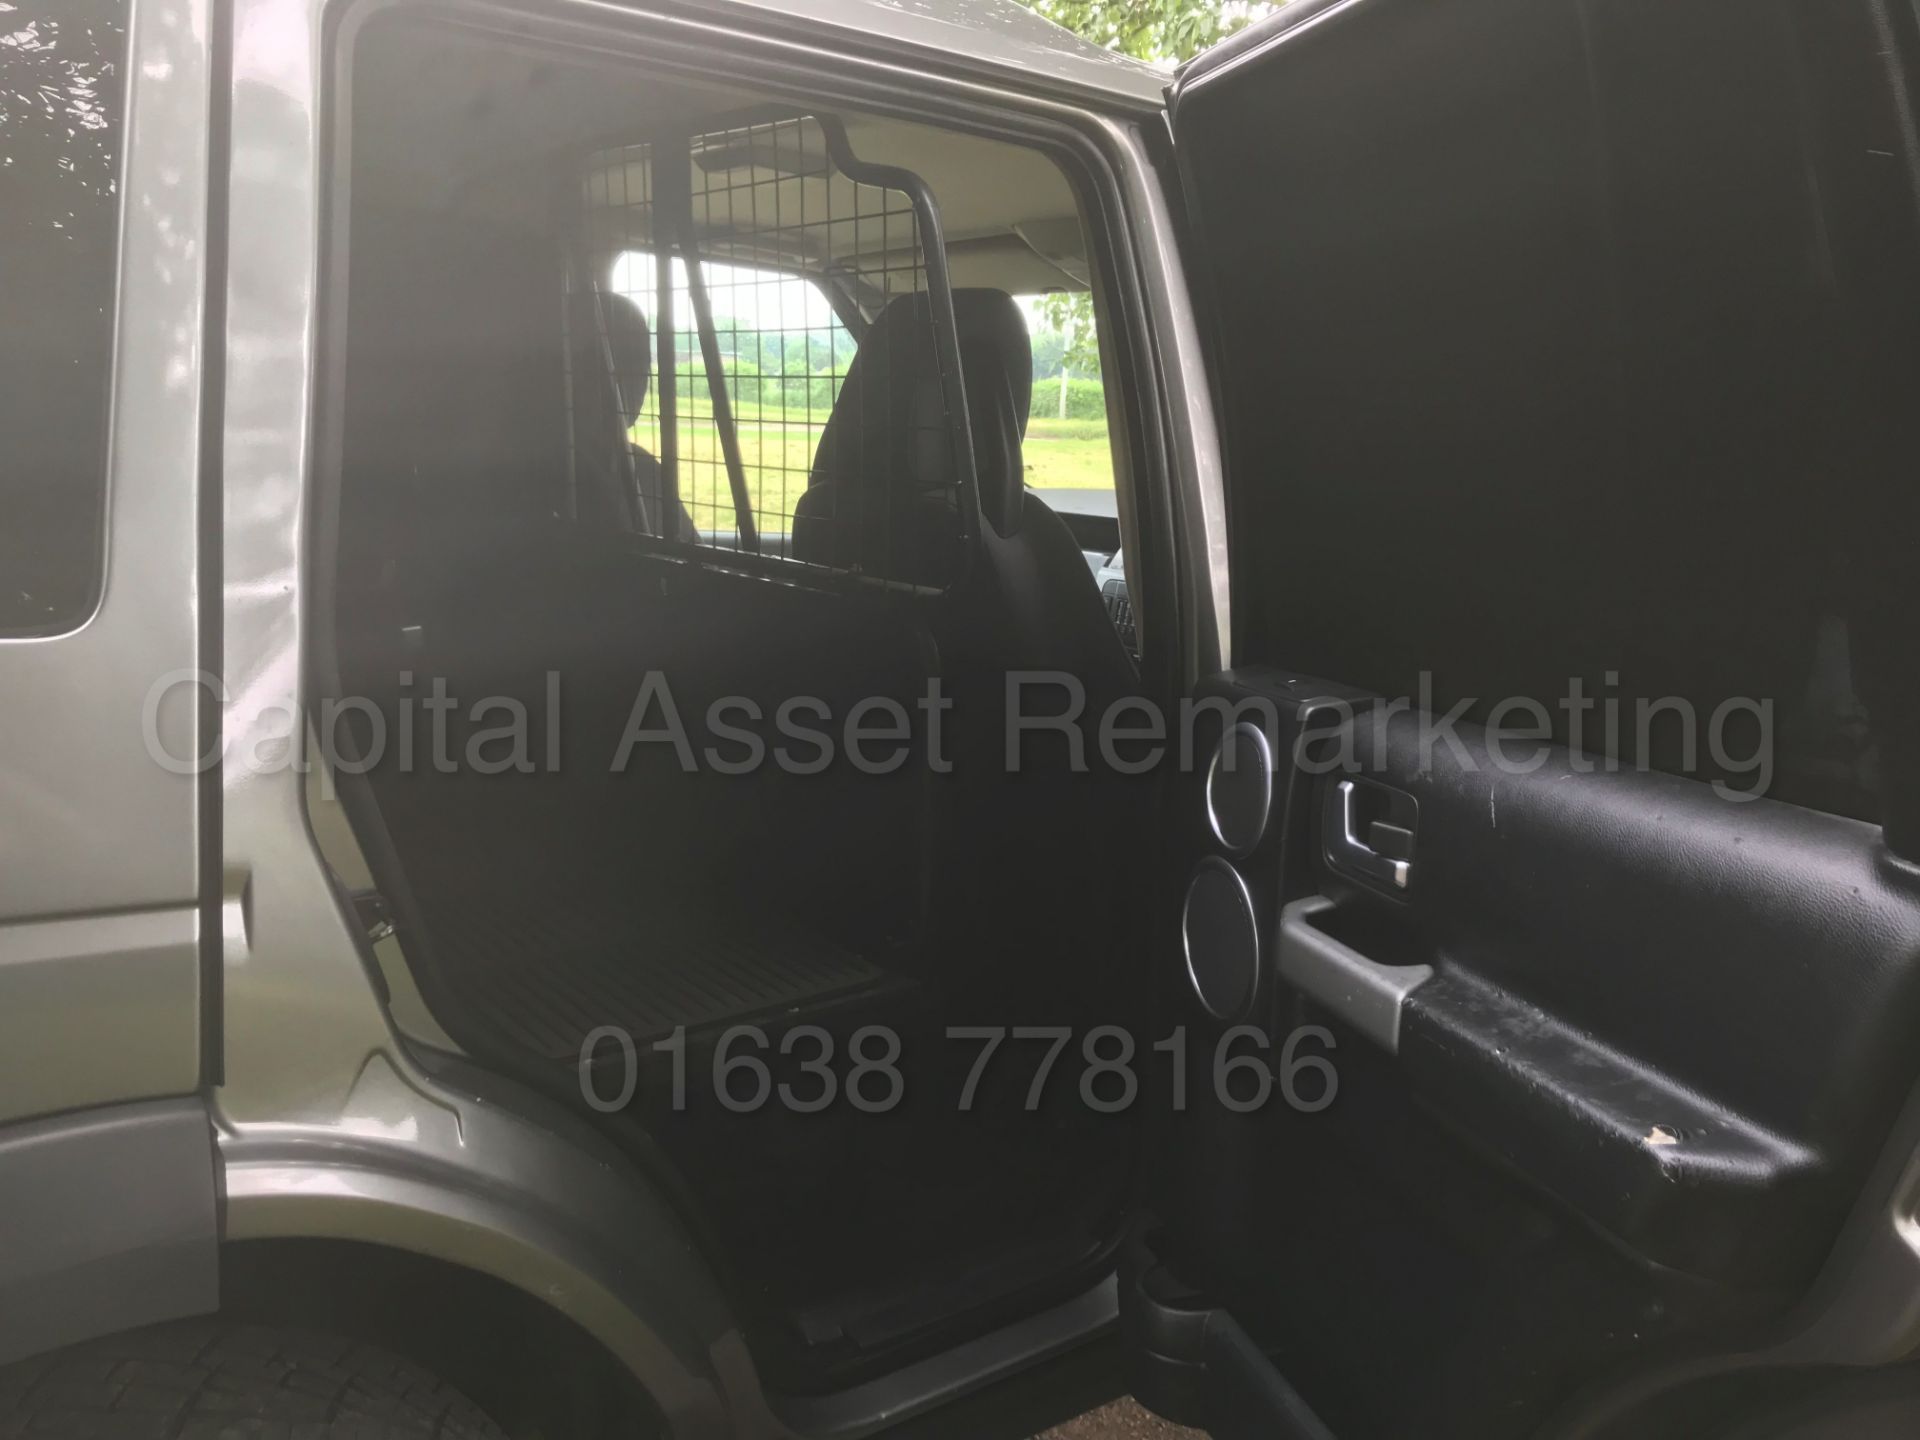 (On Sale) LAND ROVER DISCOVERY 3 'XS EDITION' **COMMERCIAL VAN**(2008 MODEL) 'TDV6-190 BHP' (NO VAT) - Image 23 of 38